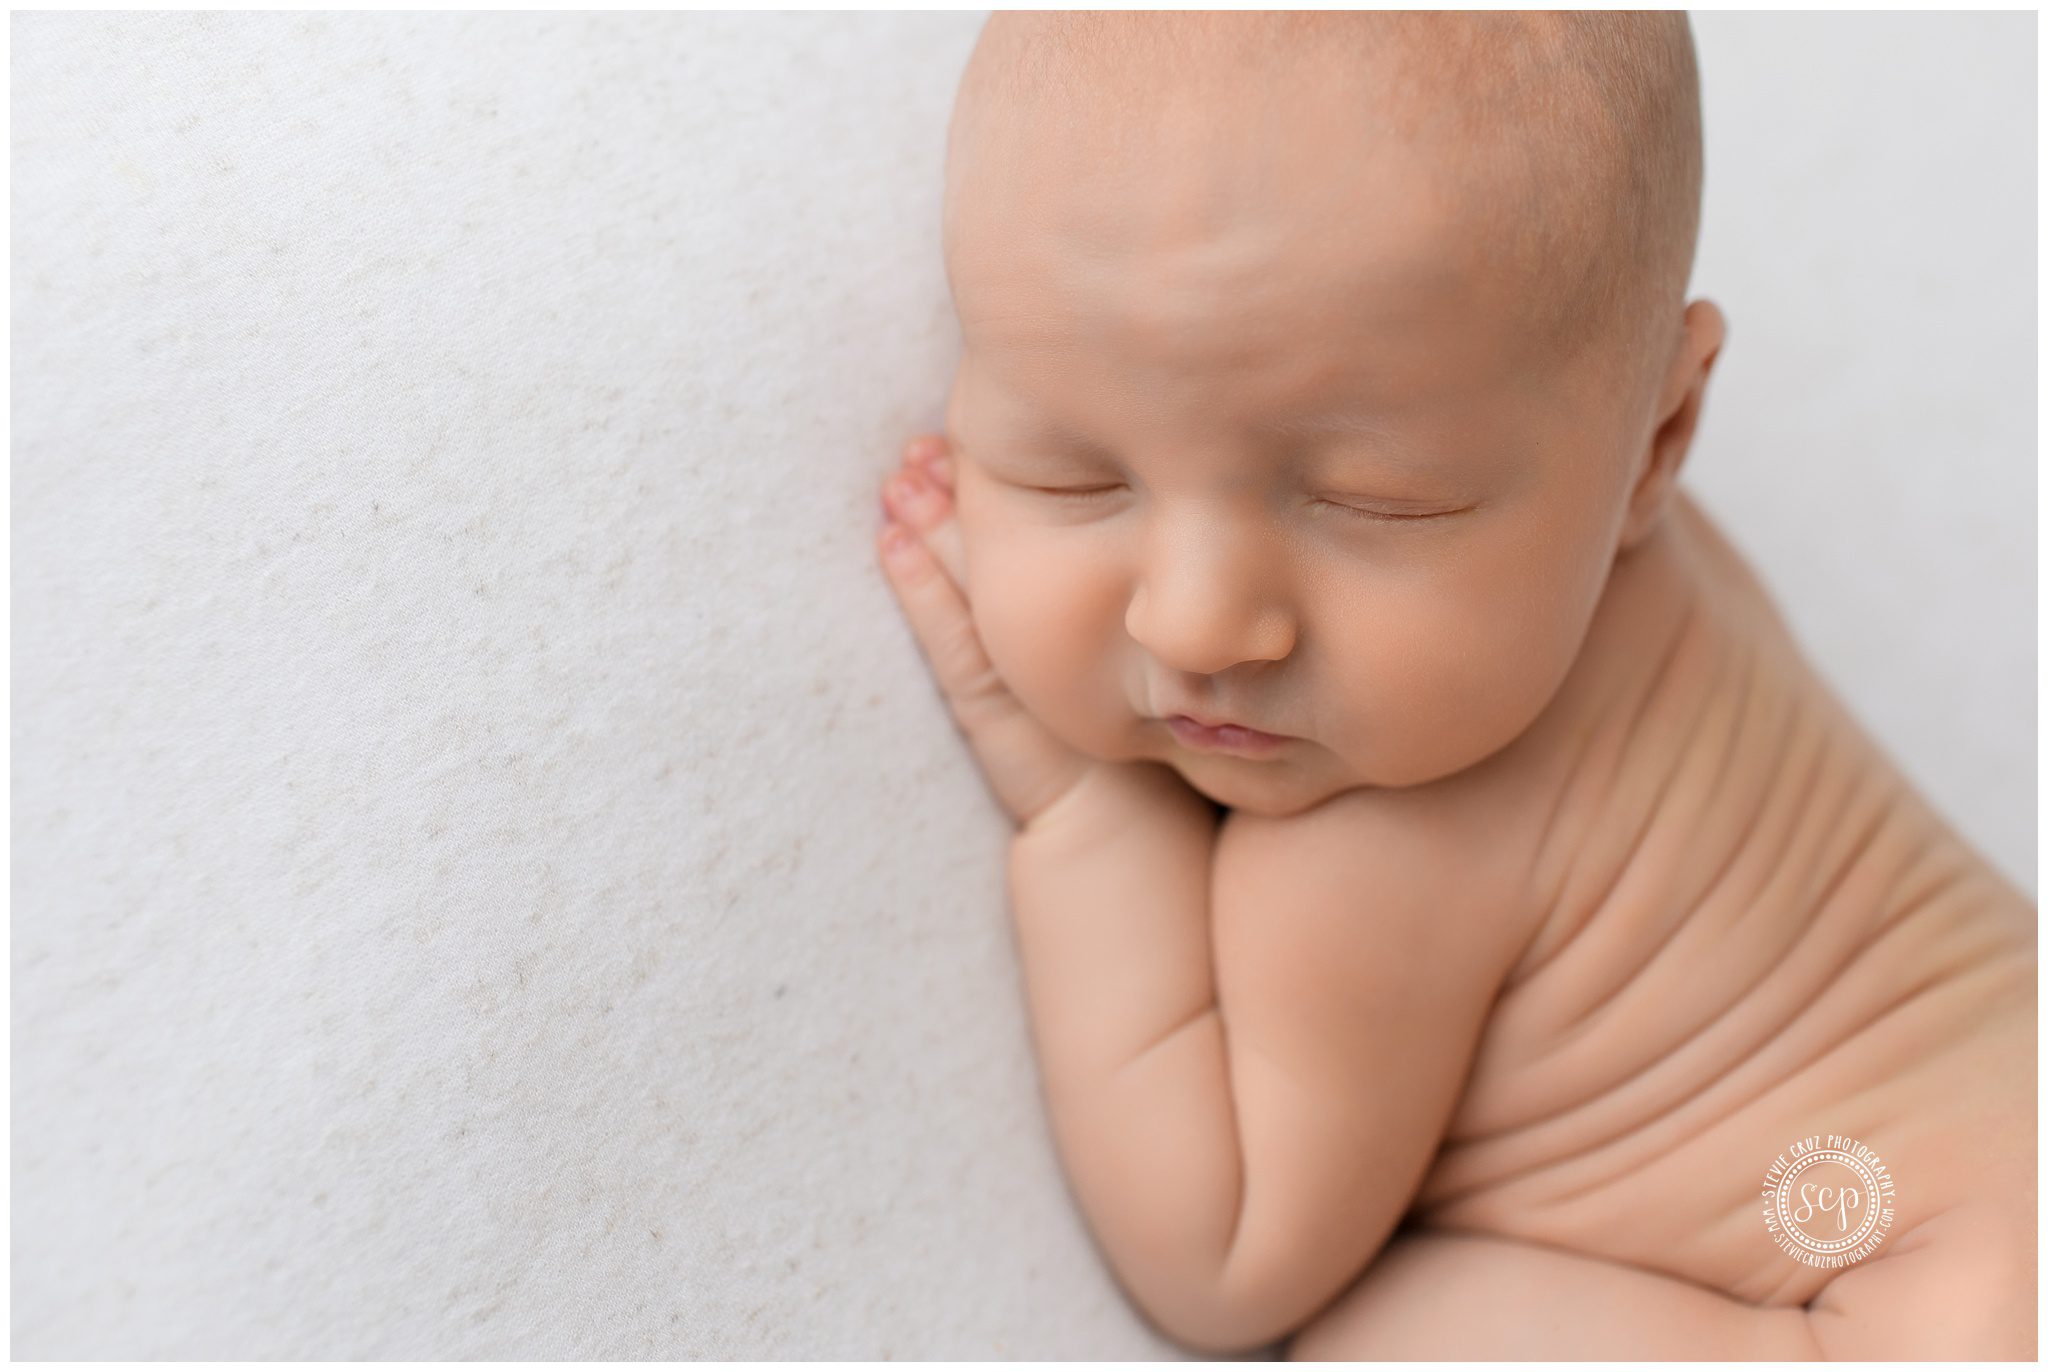 sleeping baby pose ideas for newborn picture inspiration 